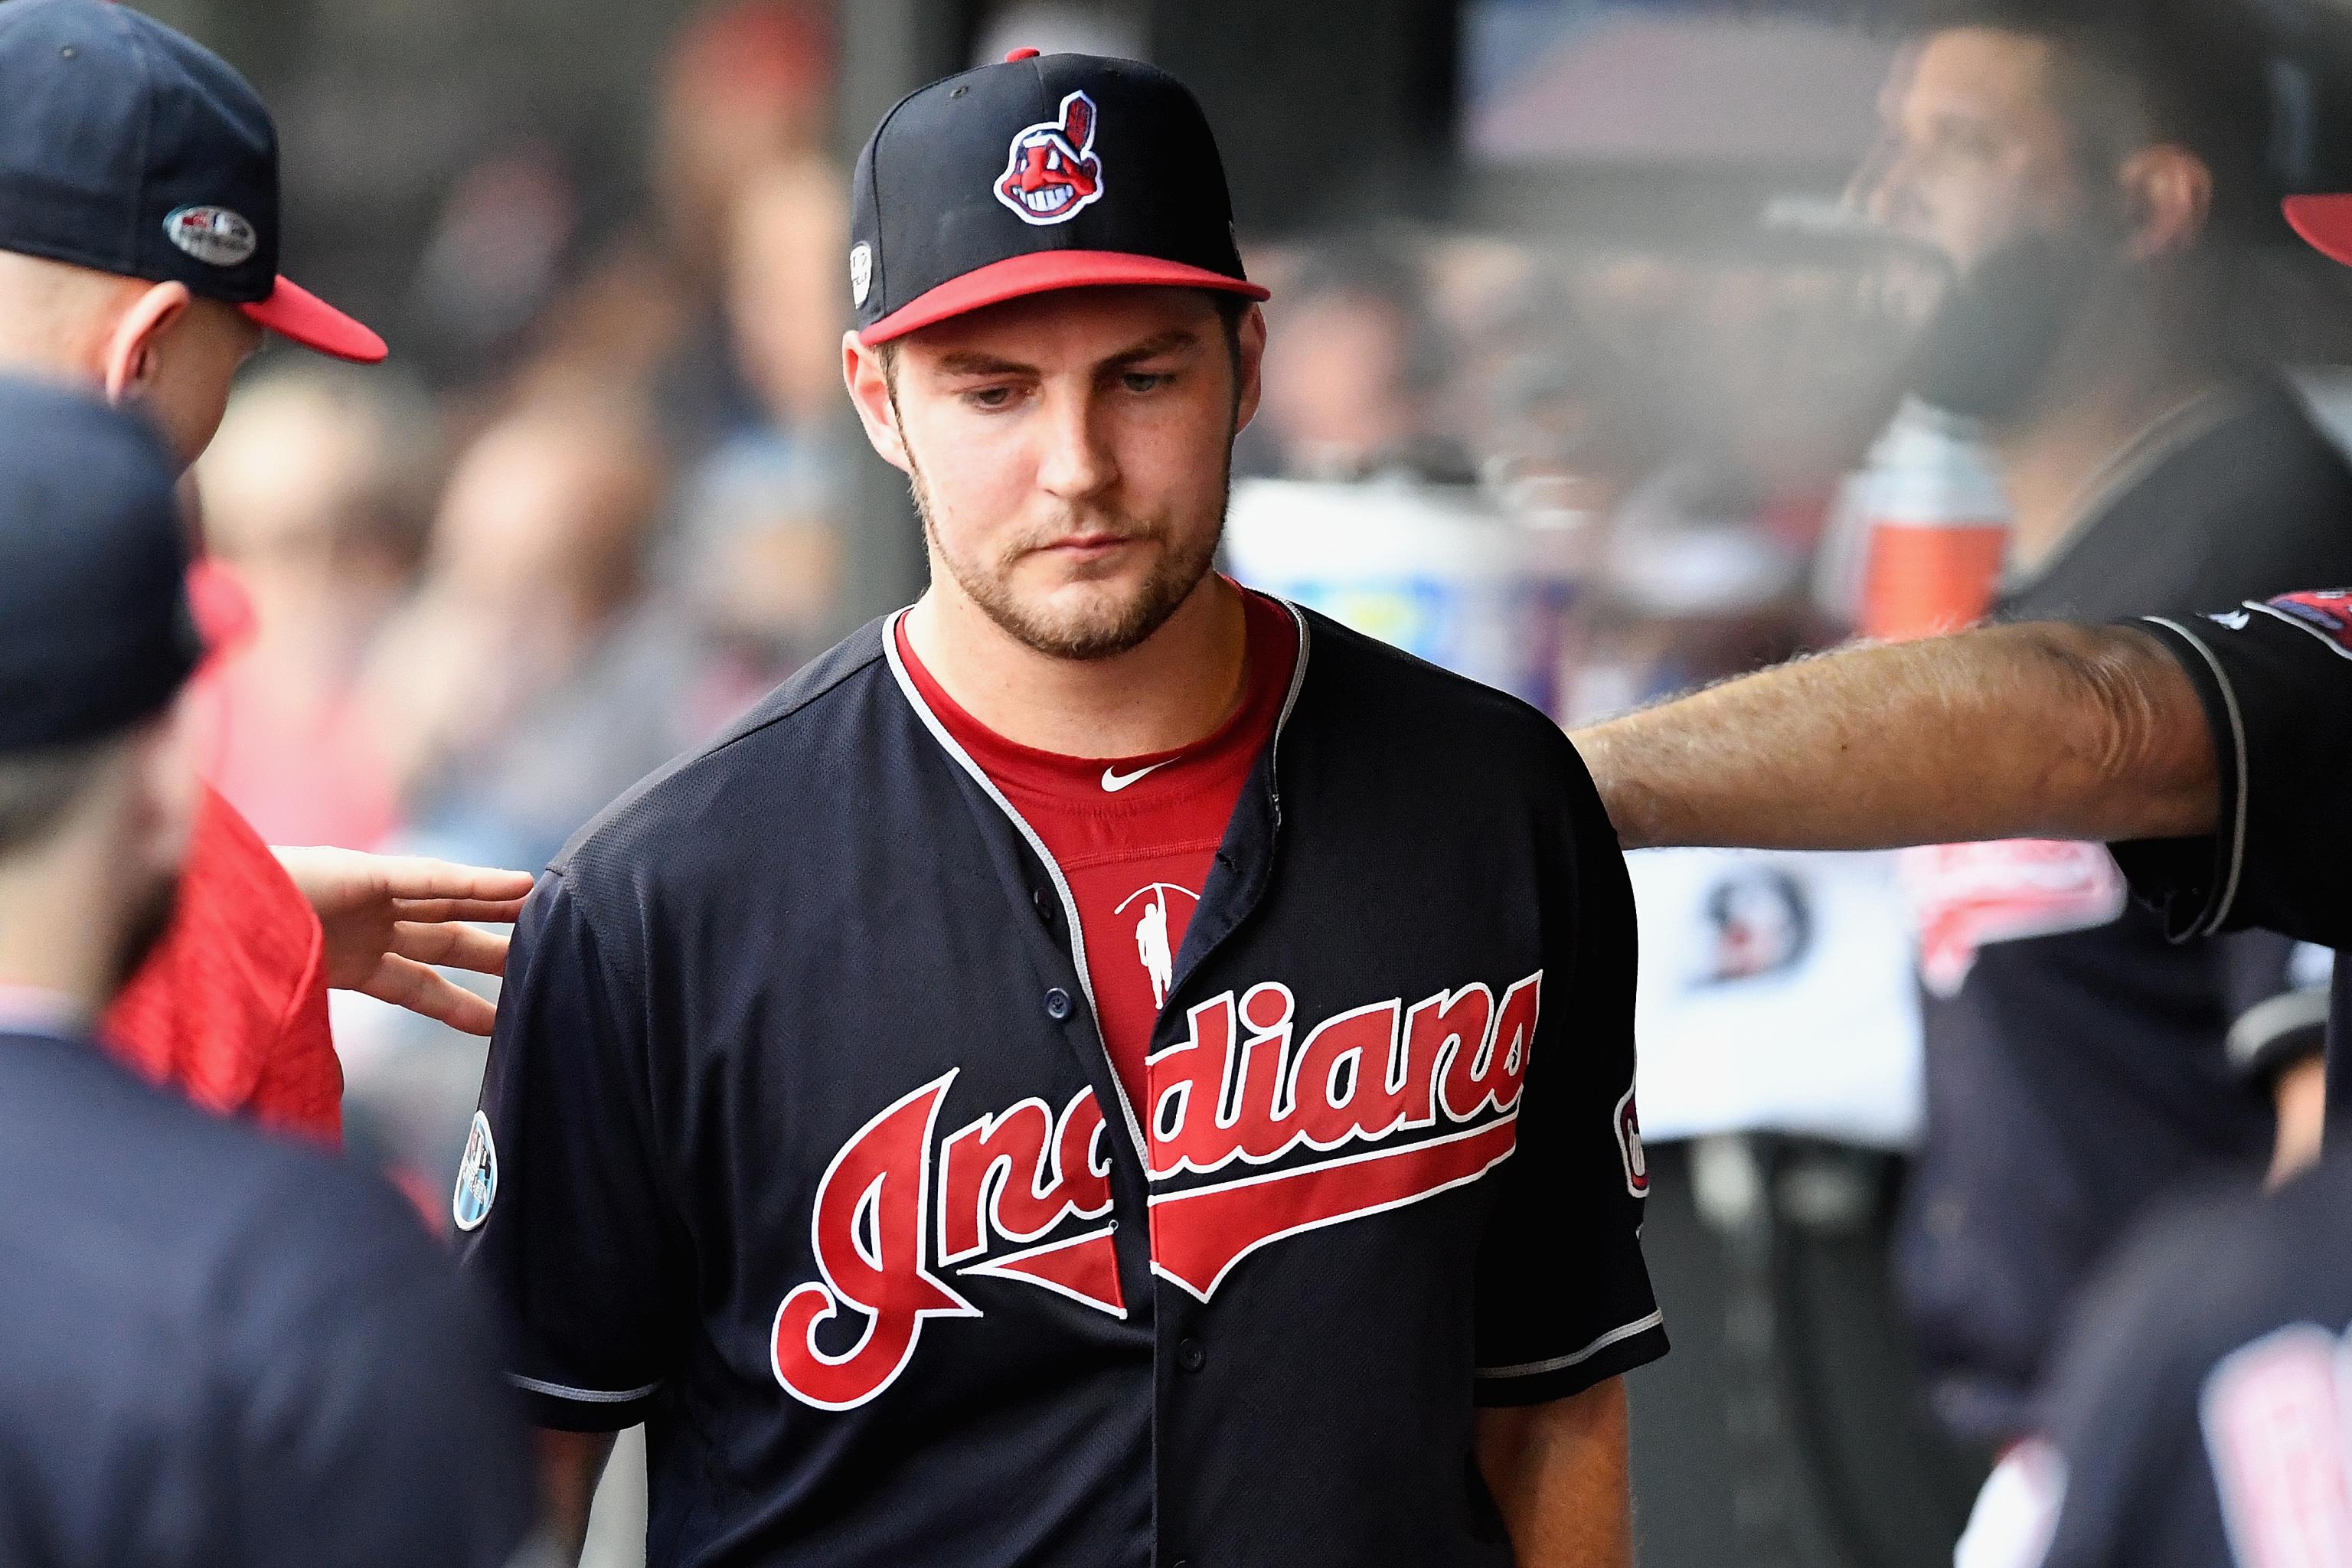 Trevor Bauer questions MLB: Only home team family members can attend?